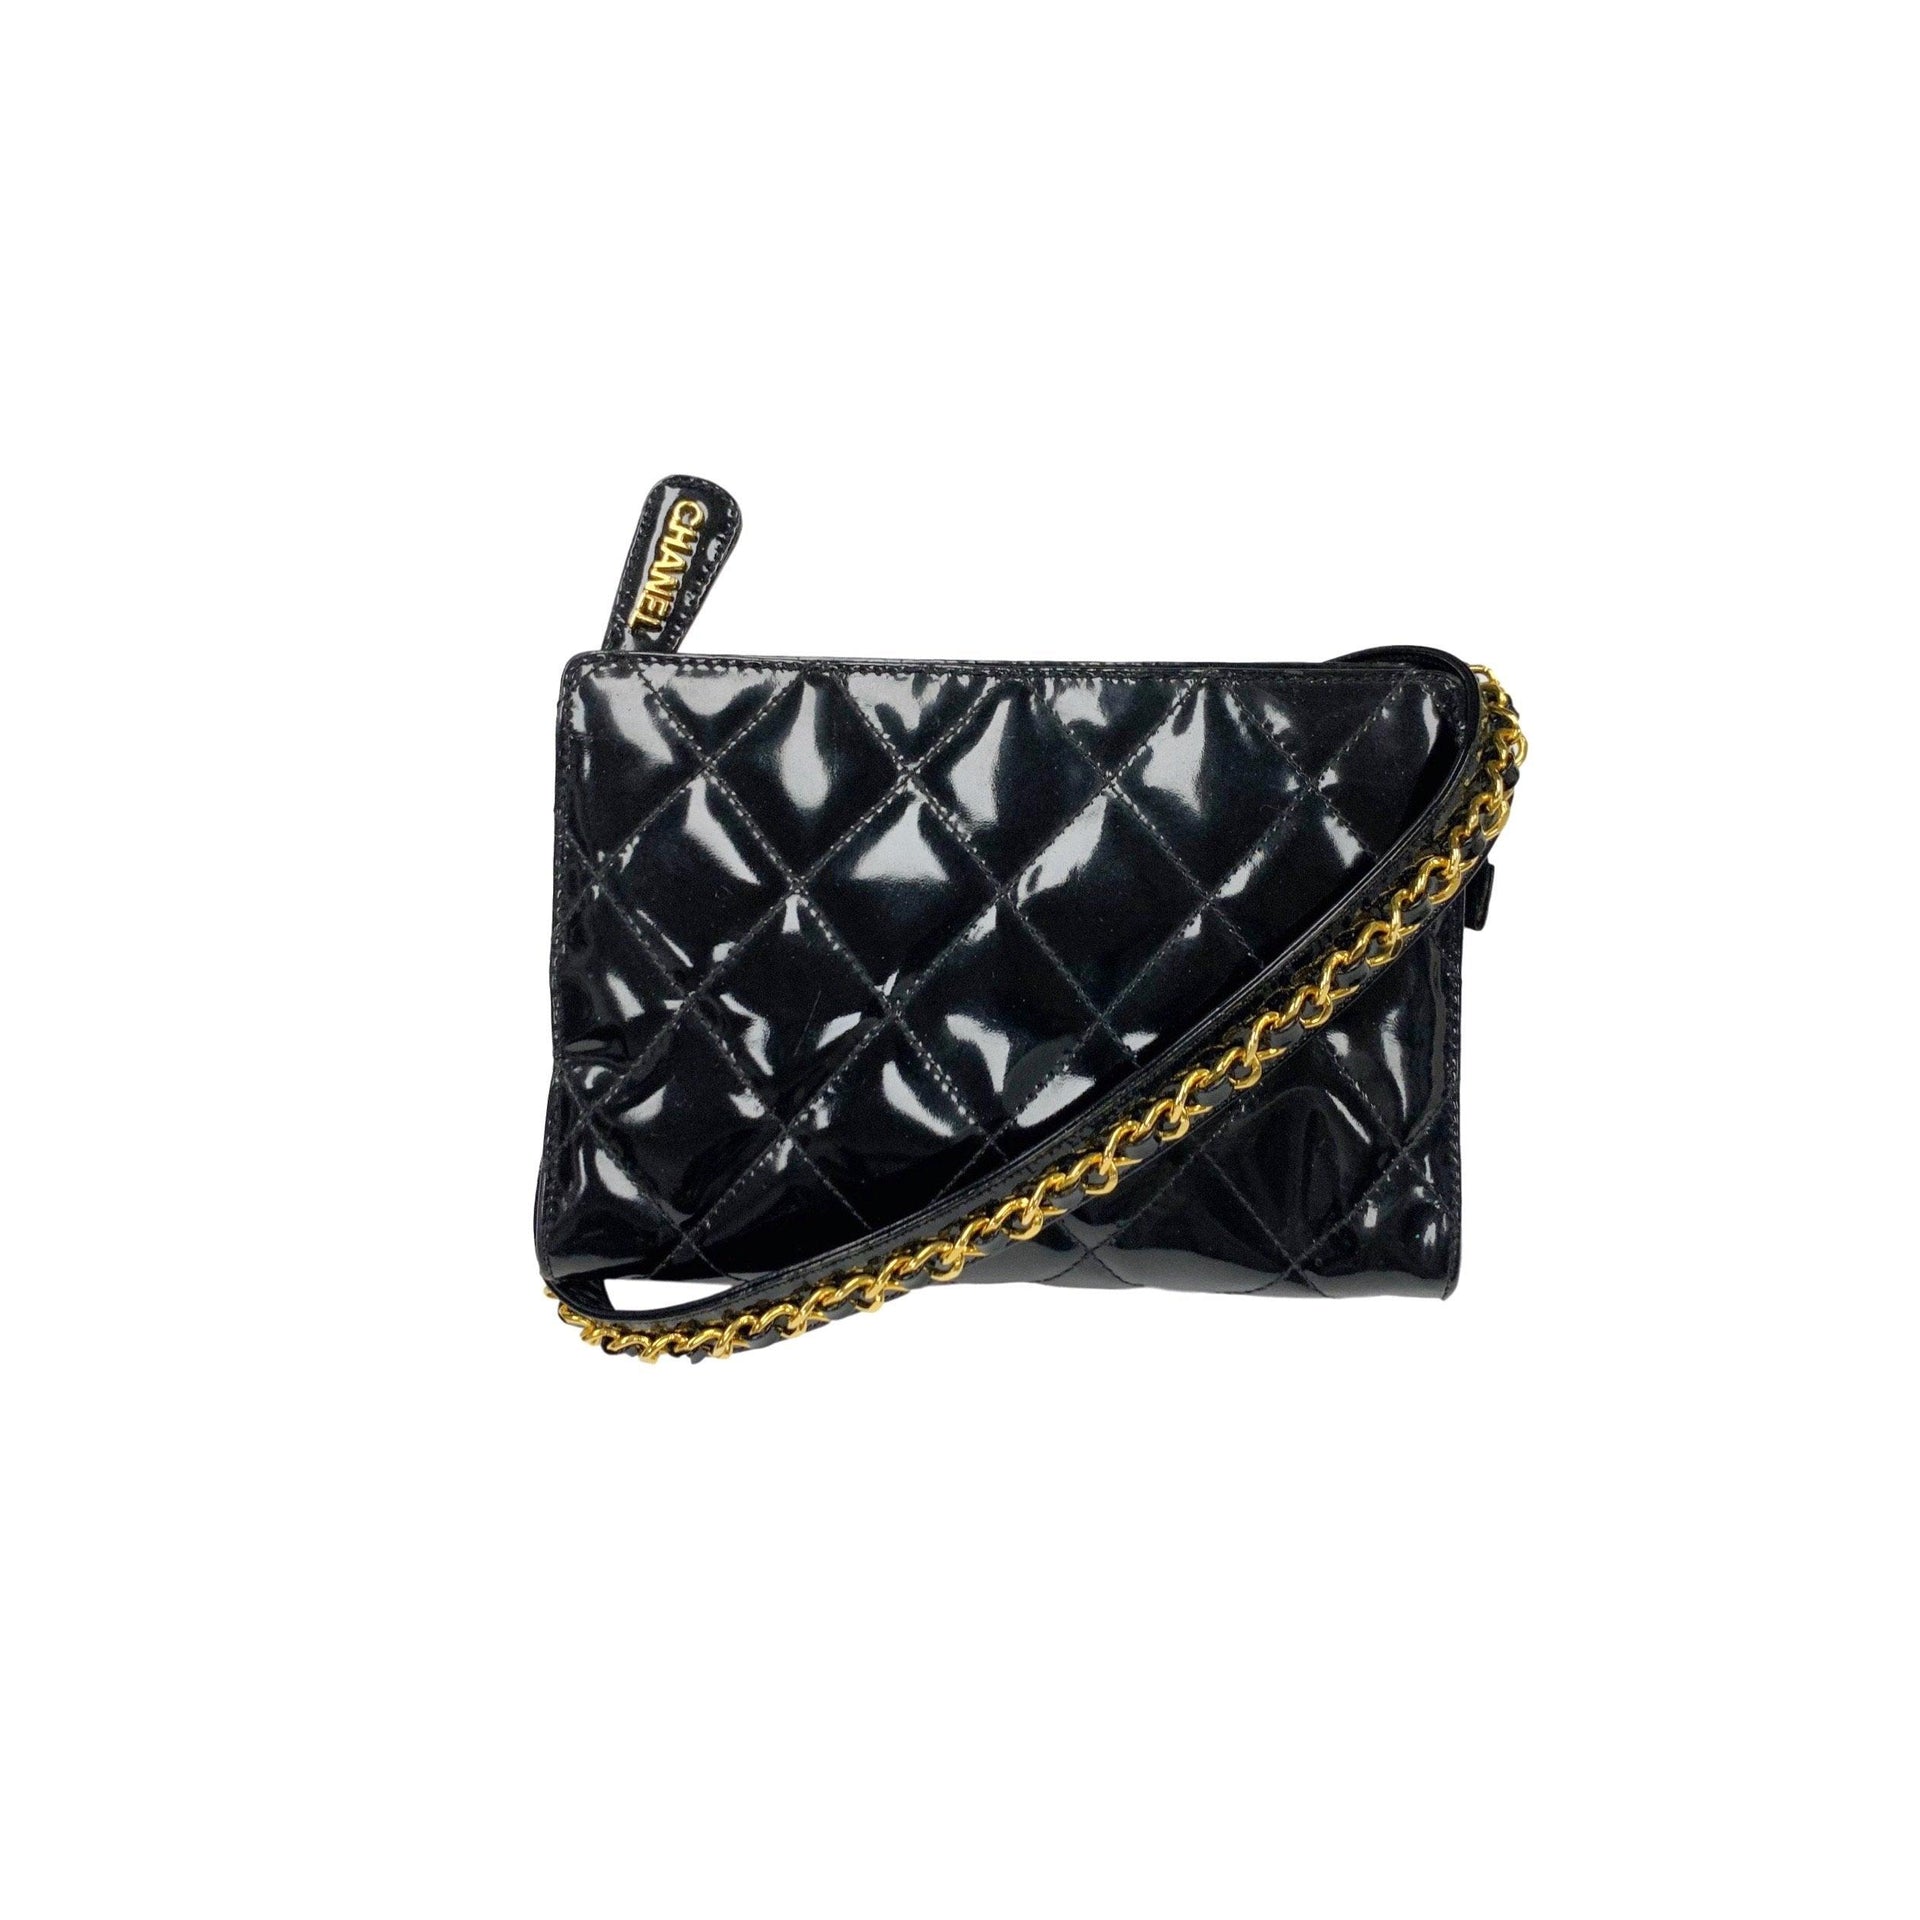 Chanel Black Patent Leather Quilted Belt Bag